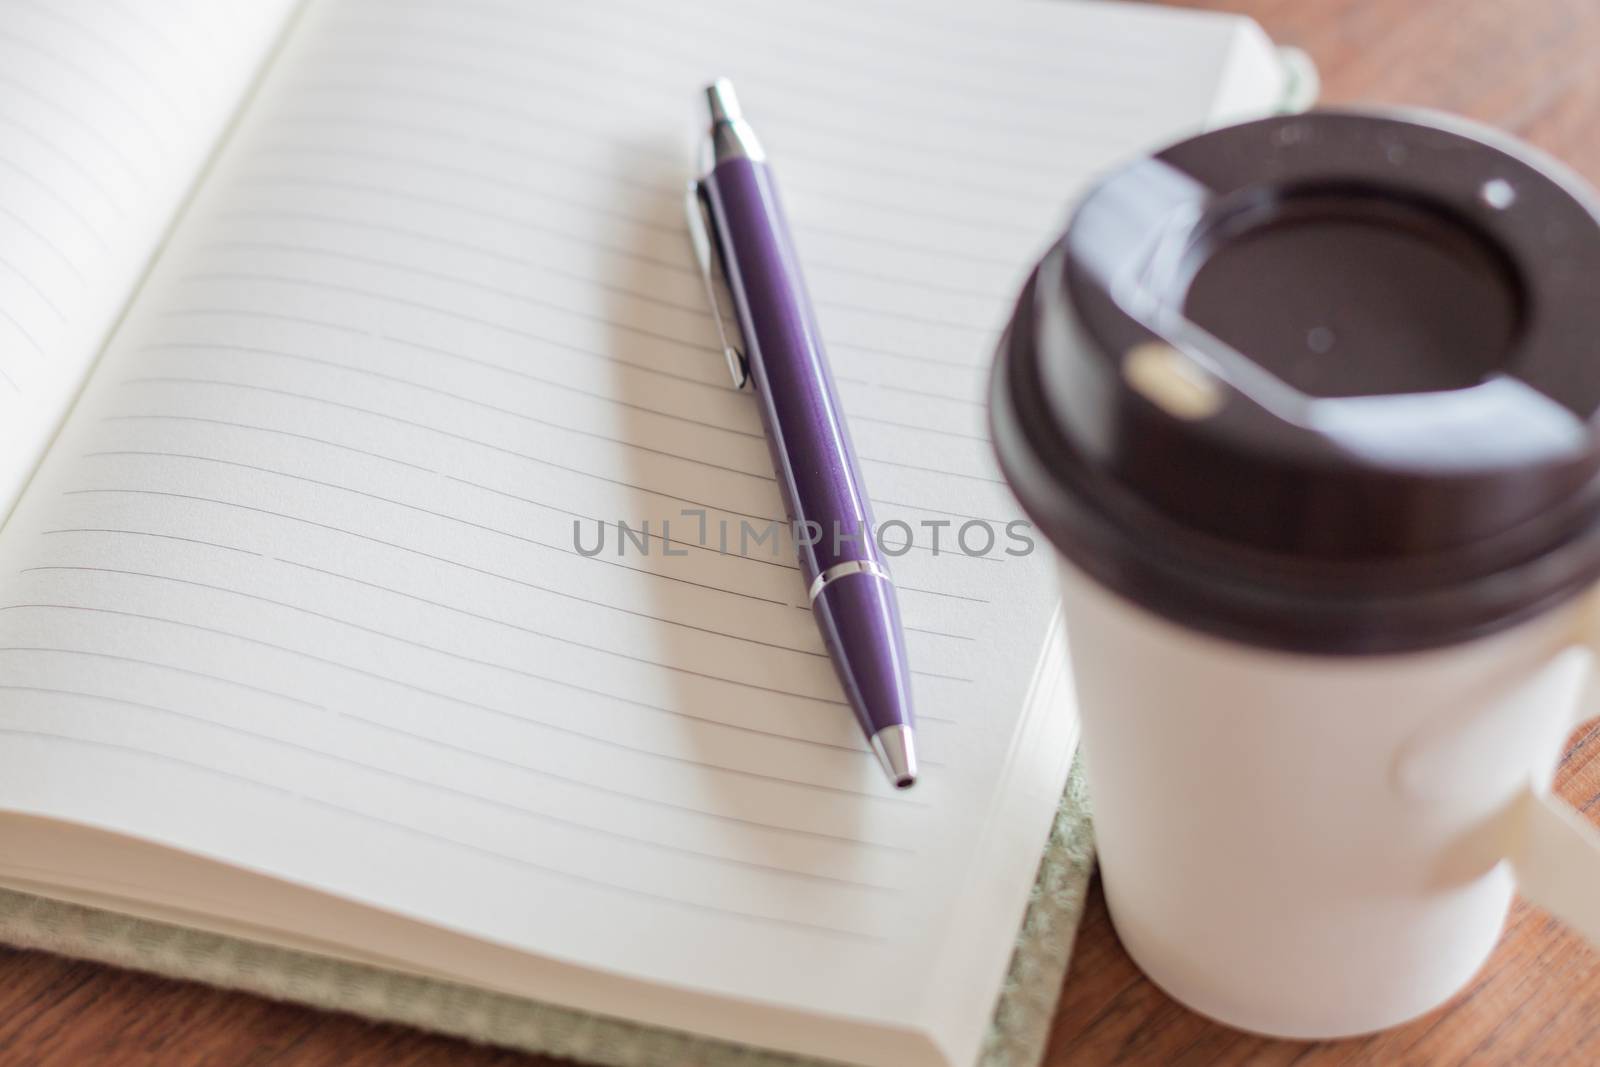 Pen and notebook with coffee cup, stock photo